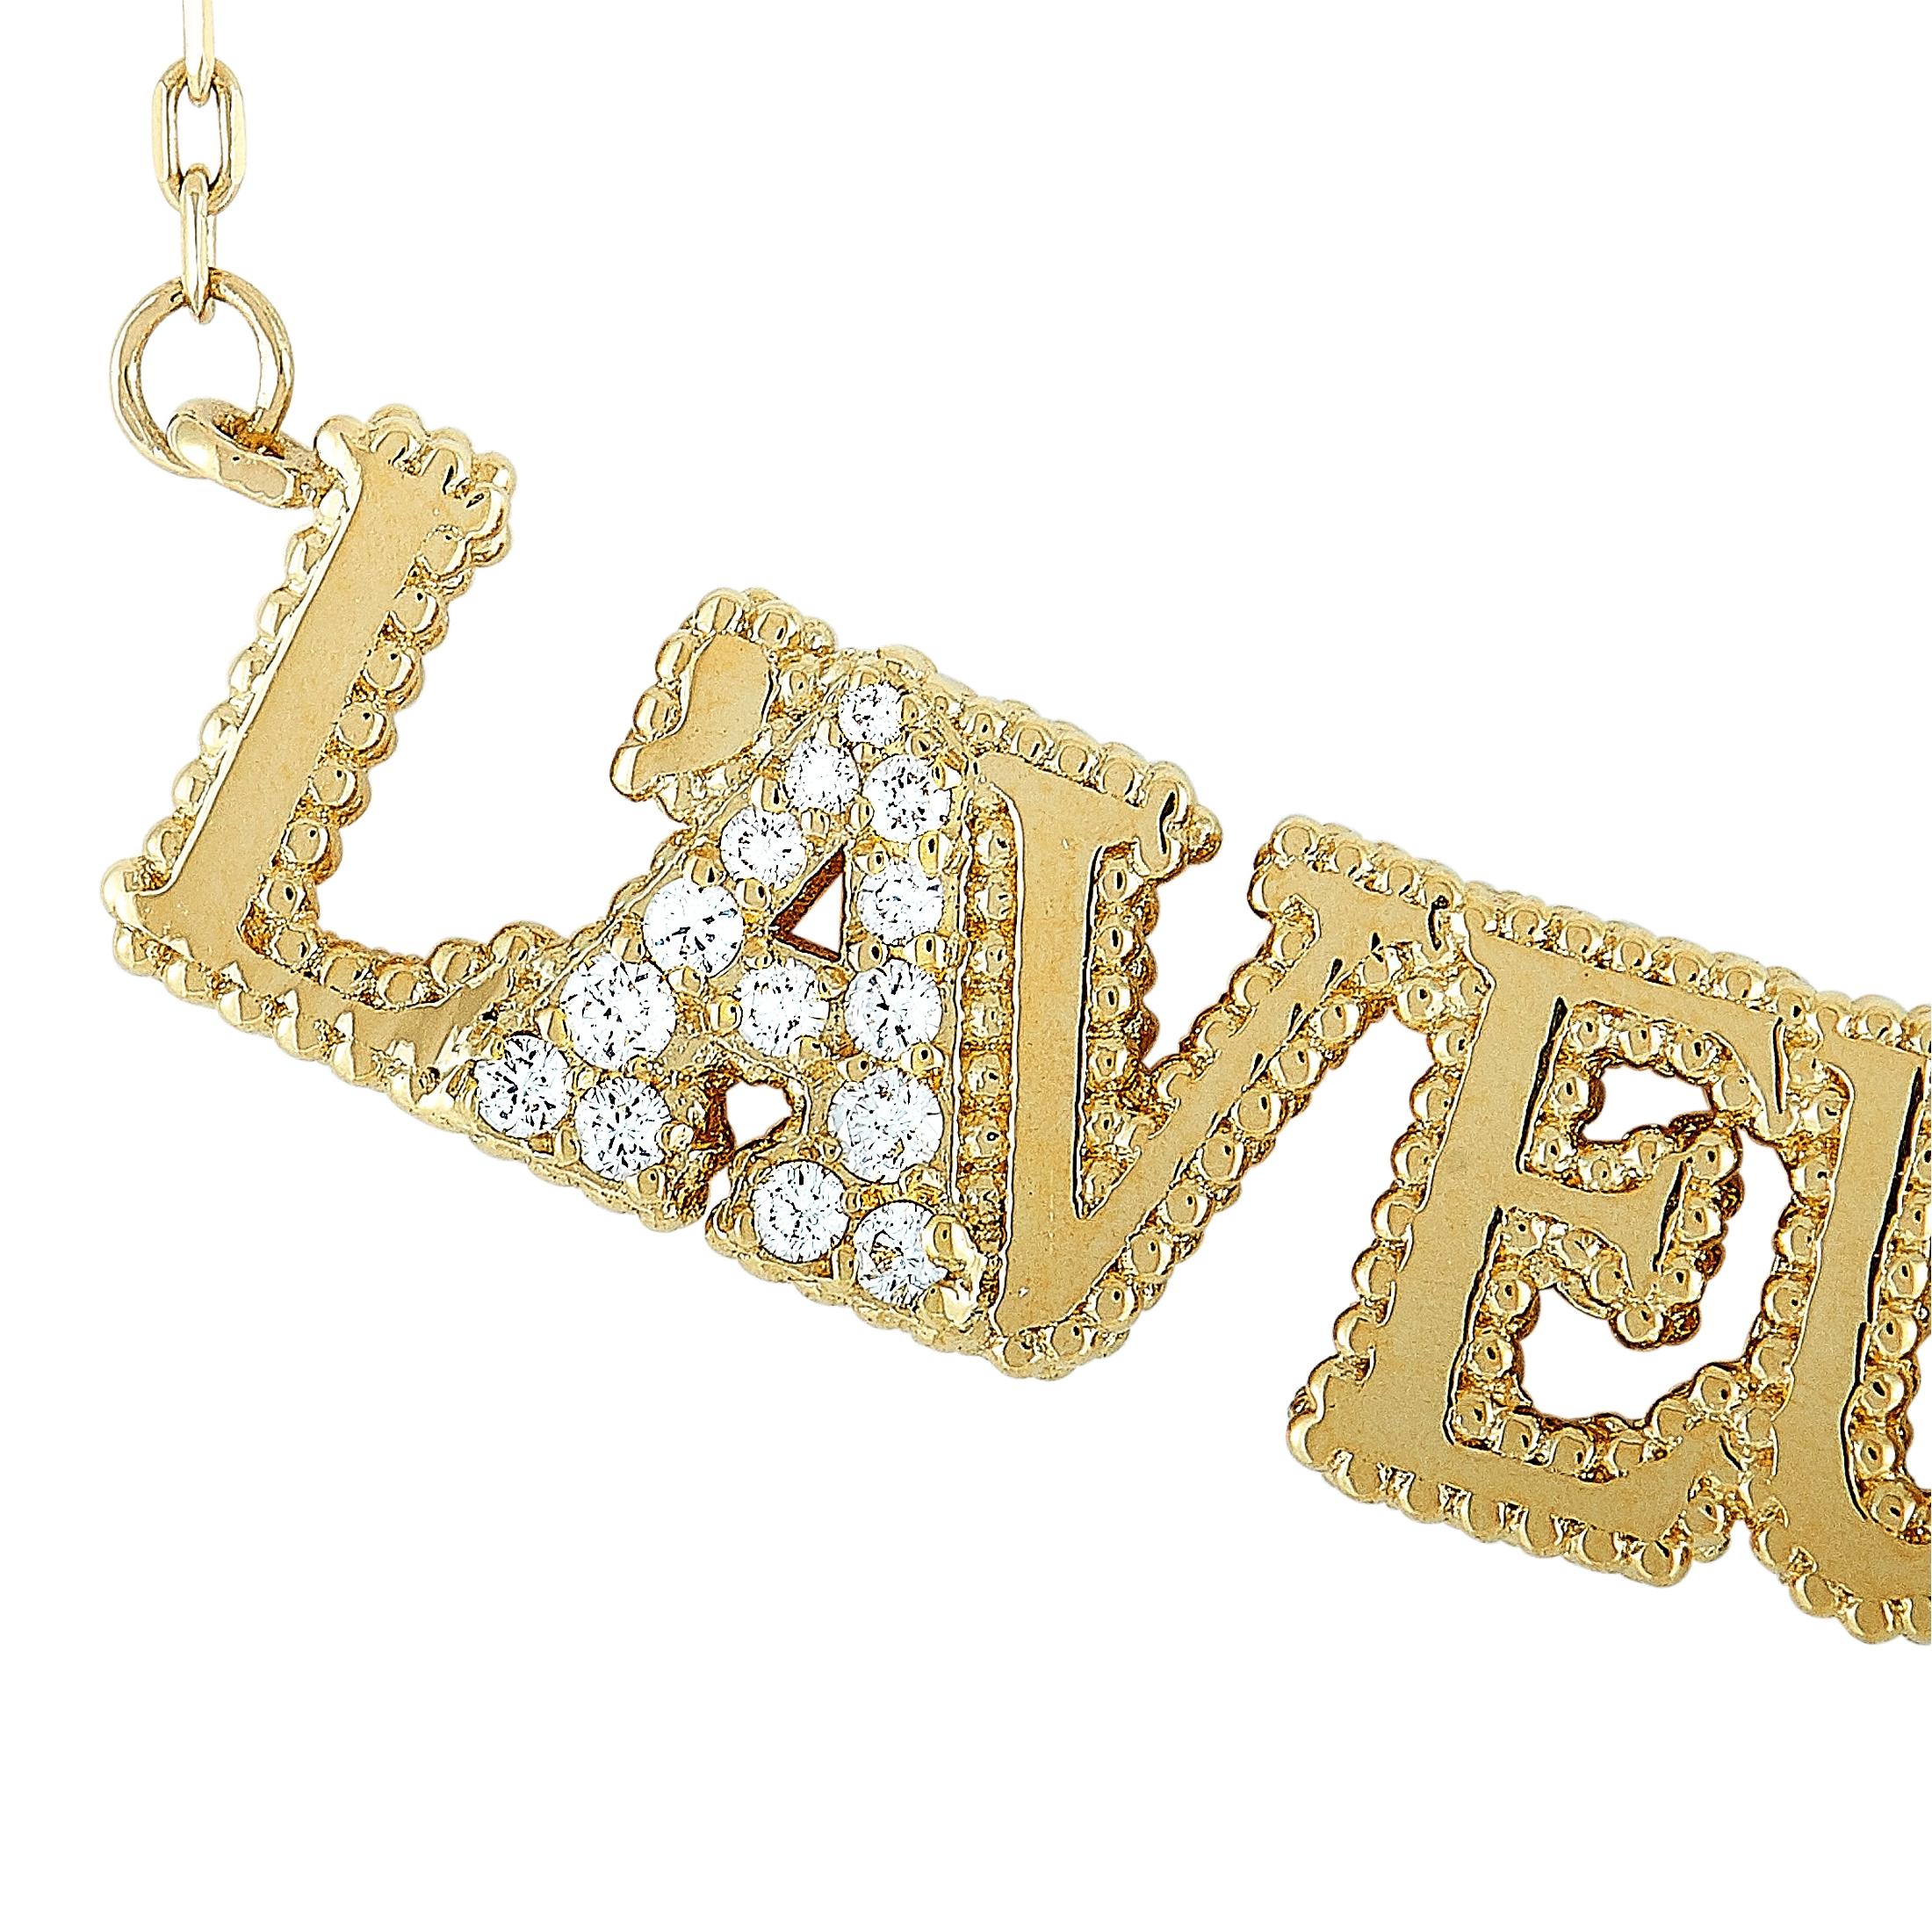 The Gucci “L'Aveugle Par Amour” necklace is made out of 18K yellow gold and diamonds and weighs 9 grams. The diamonds feature GH color and VVS clarity and total approximately 0.17 carats. The necklace boasts a 12” chain and a pendant that measures